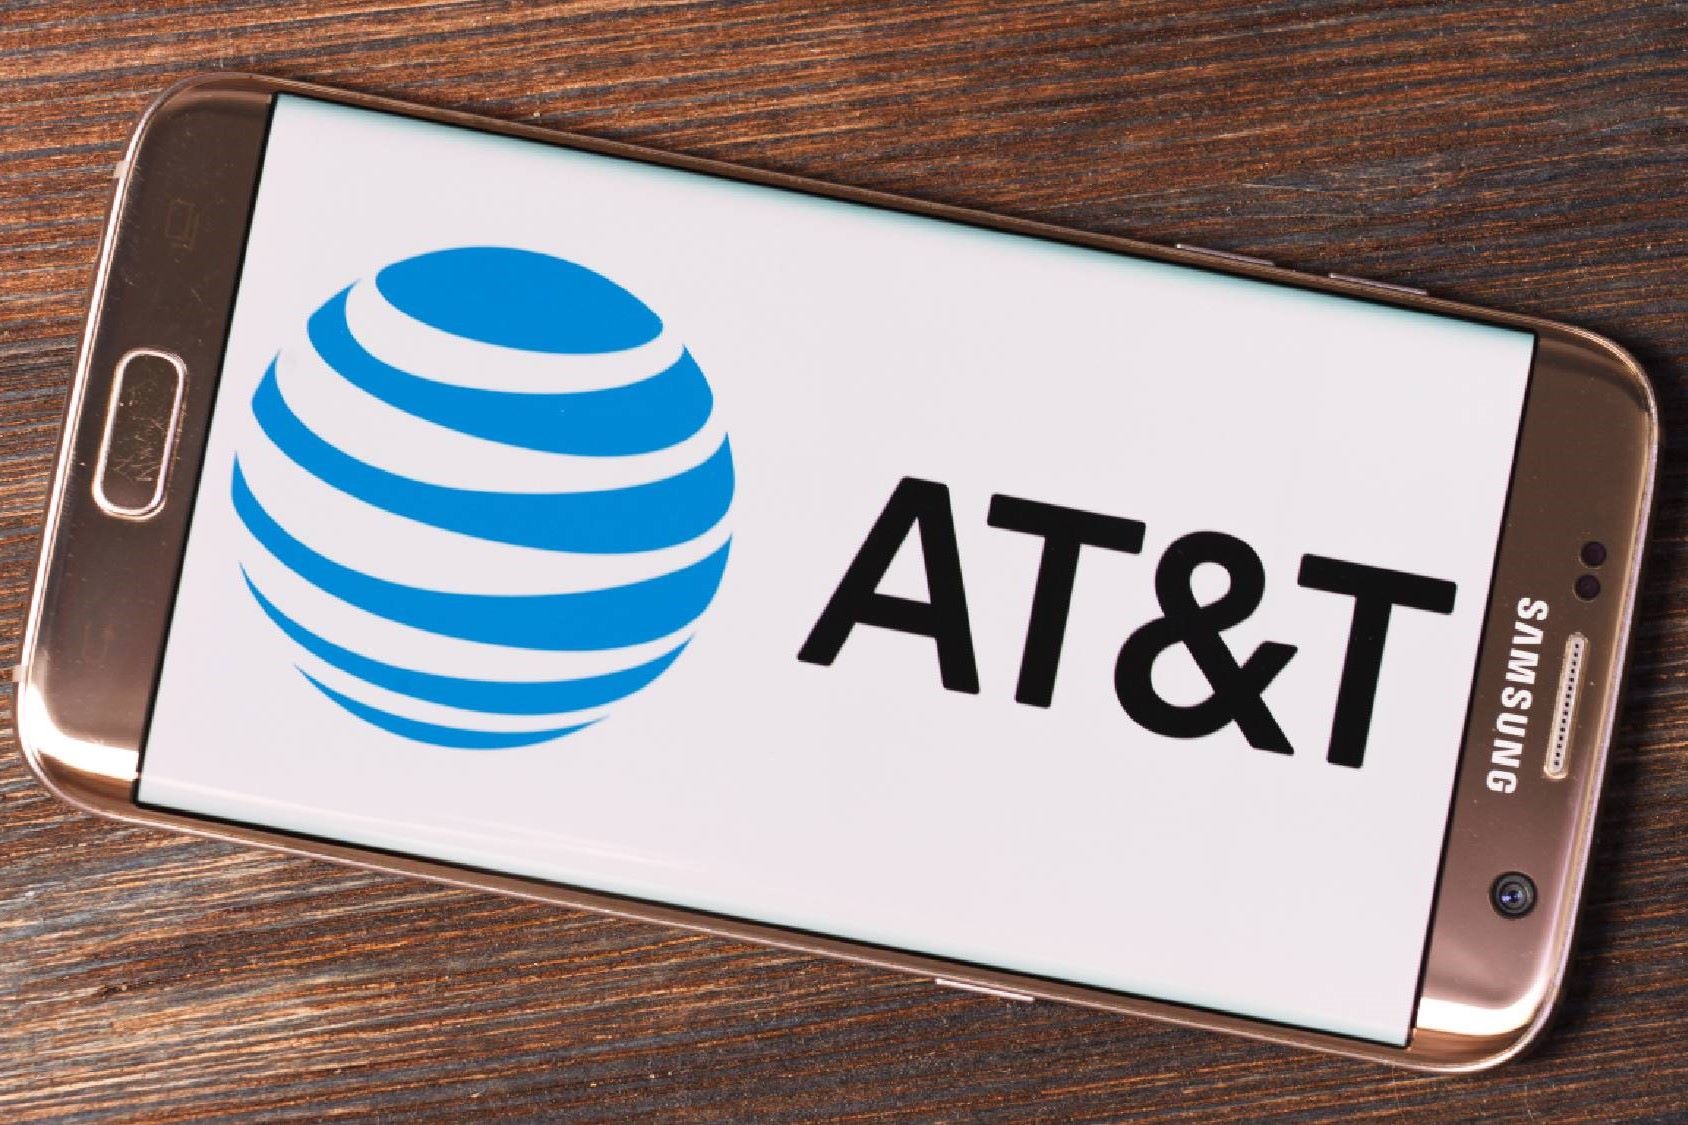 Finding A New SIM Card For AT&T: Quick Reference